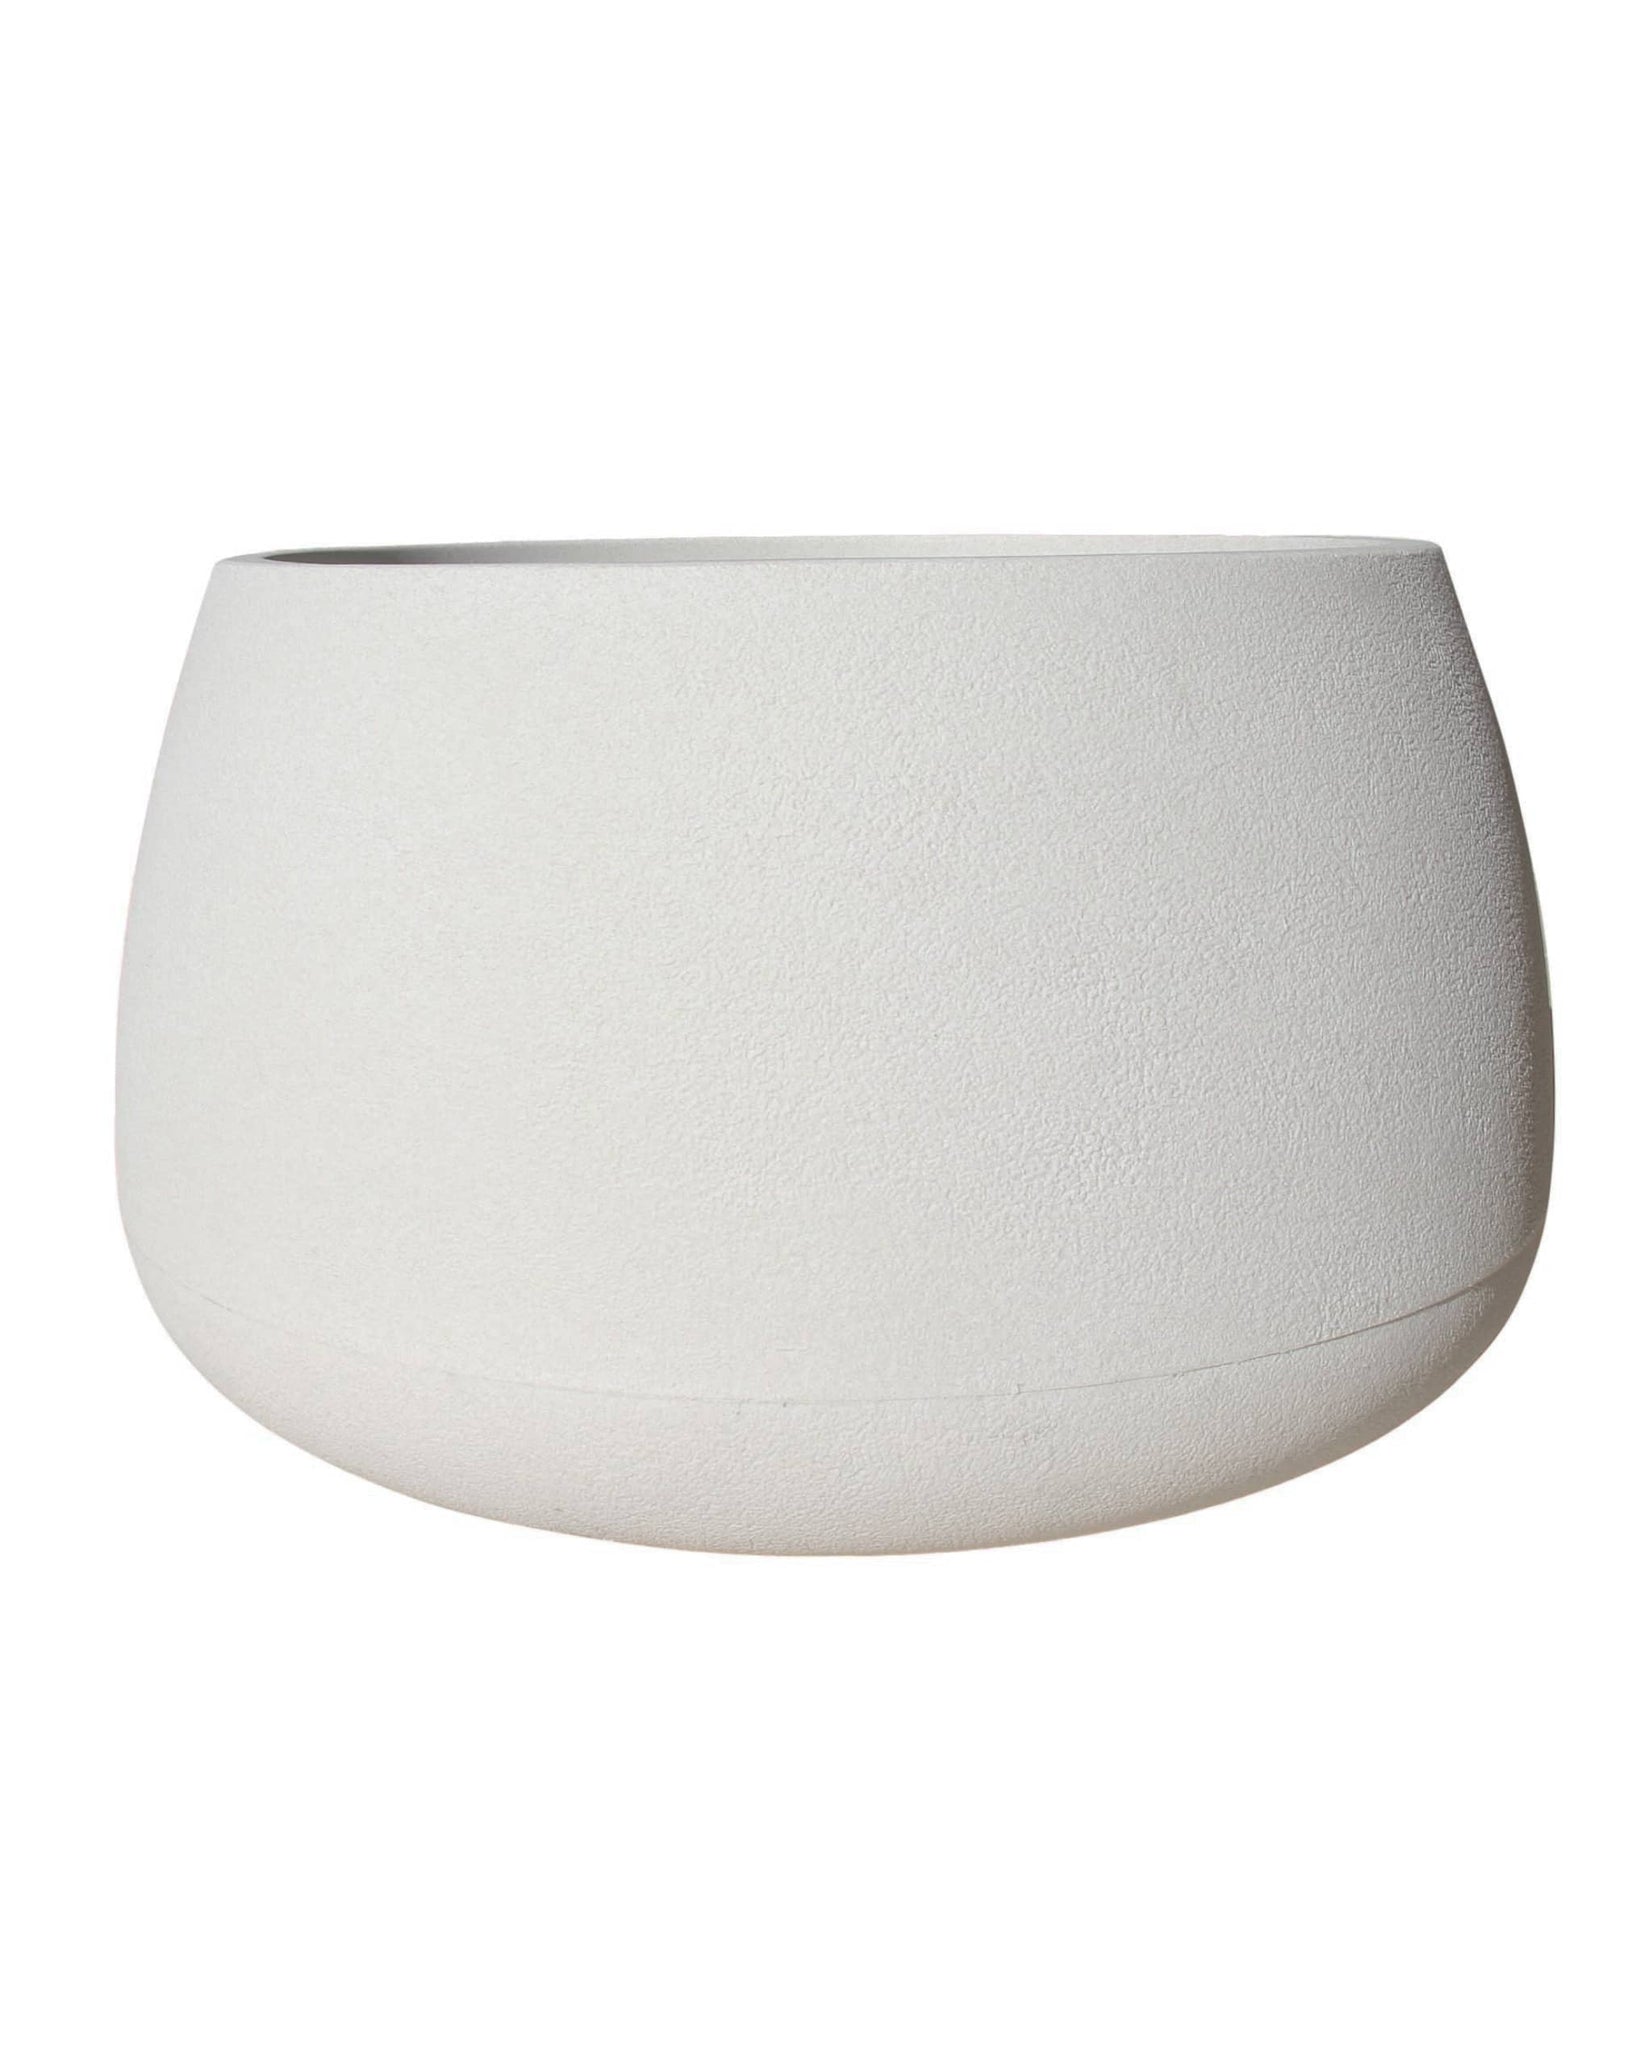 Off-white Low rise modern contemporary plant pot with stunning slightly textured finish, and wide neck for planting. Order at Florastyle by Hingham.